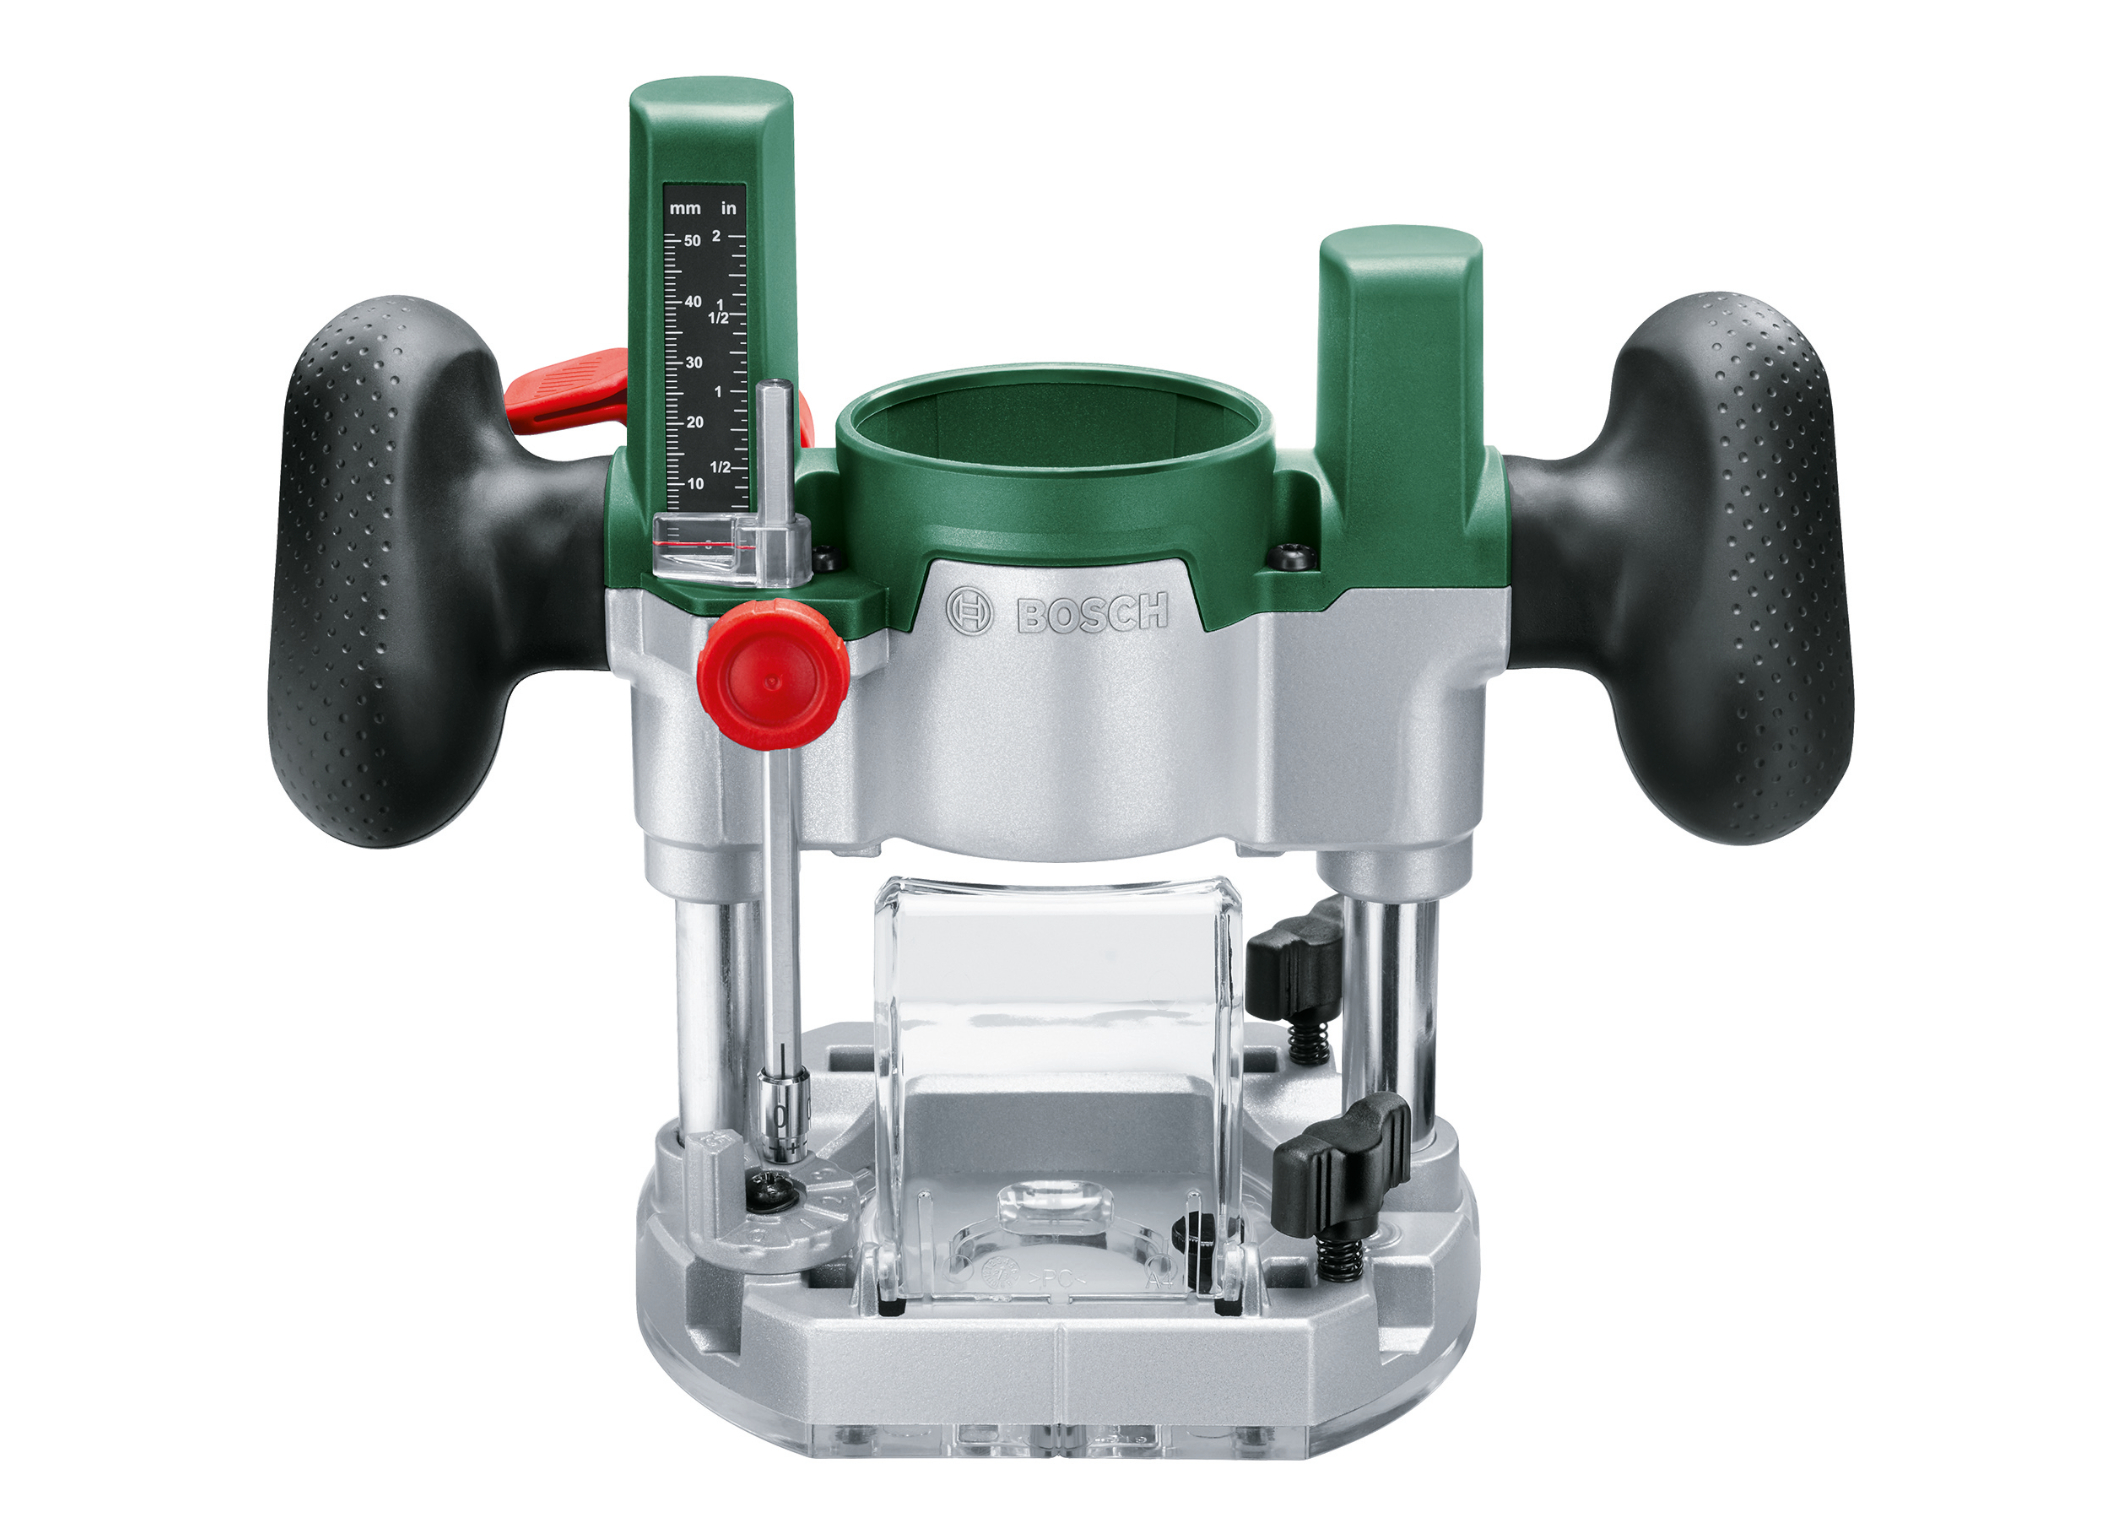 Choose any standard cut with seven-step depth turret: New router plunge base from Bosch for DIYers